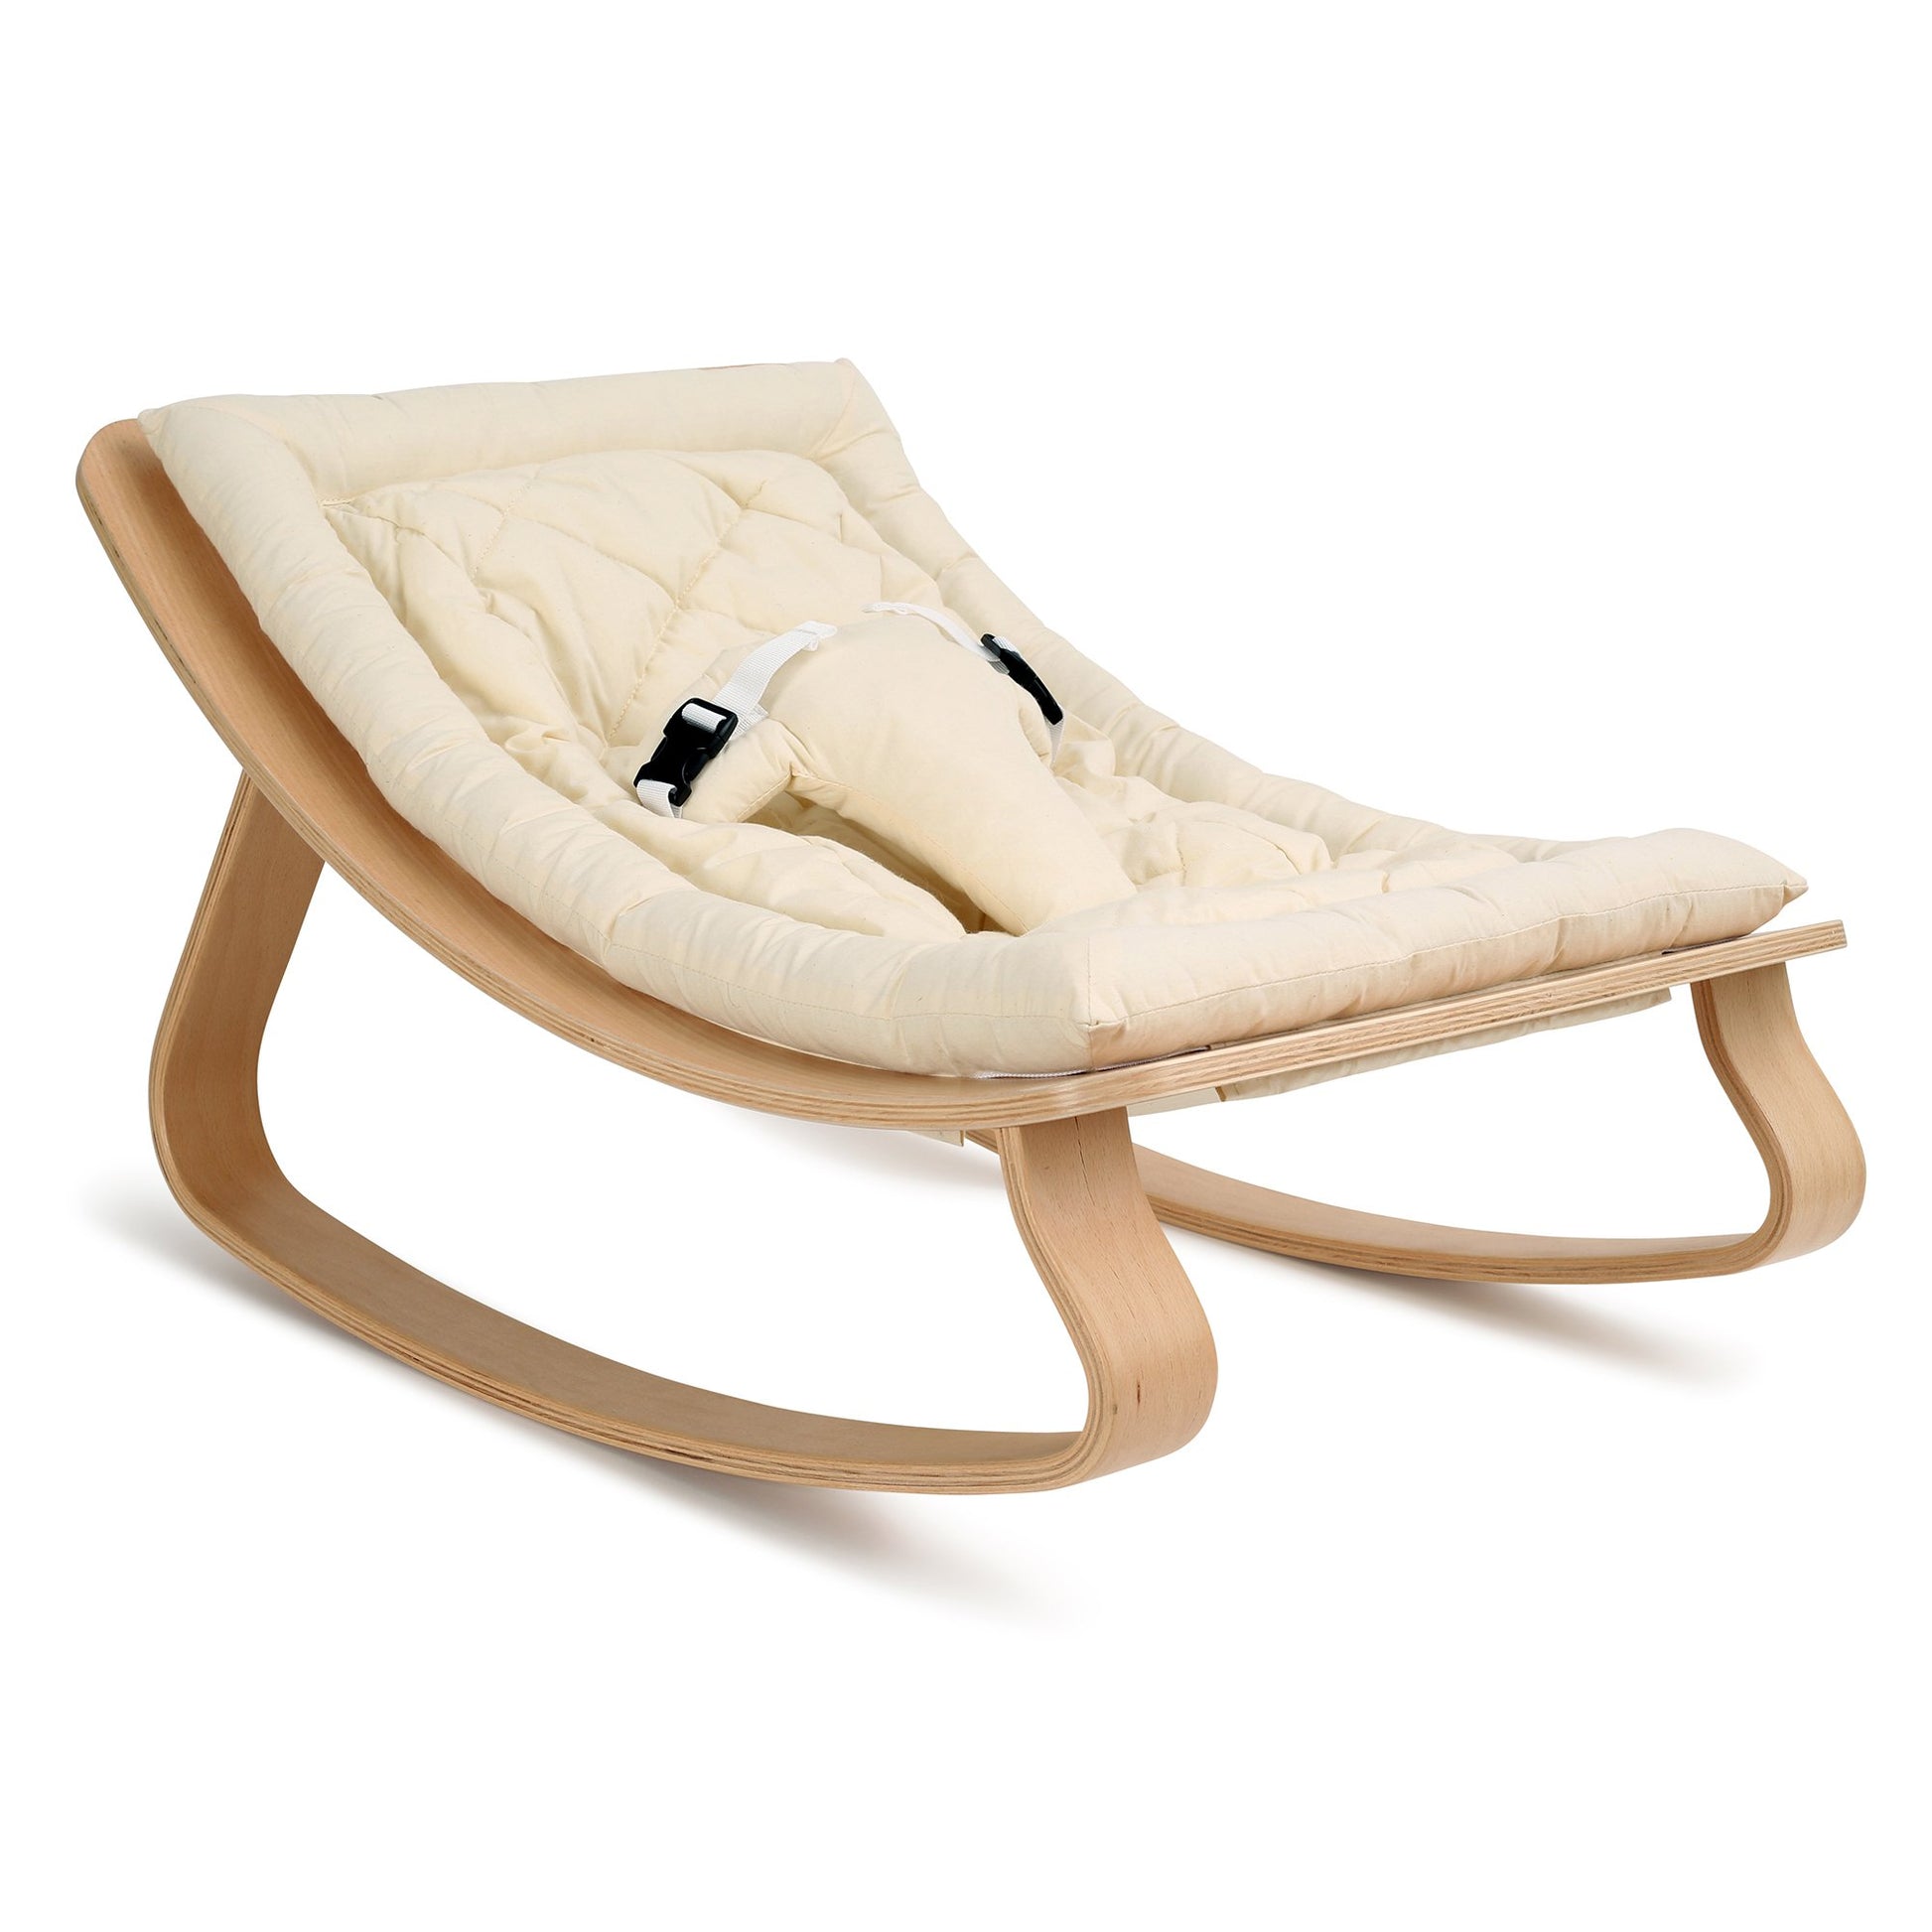 Levo Baby Rocker - Beech with Organic White Cushion - Little Reef and Friends